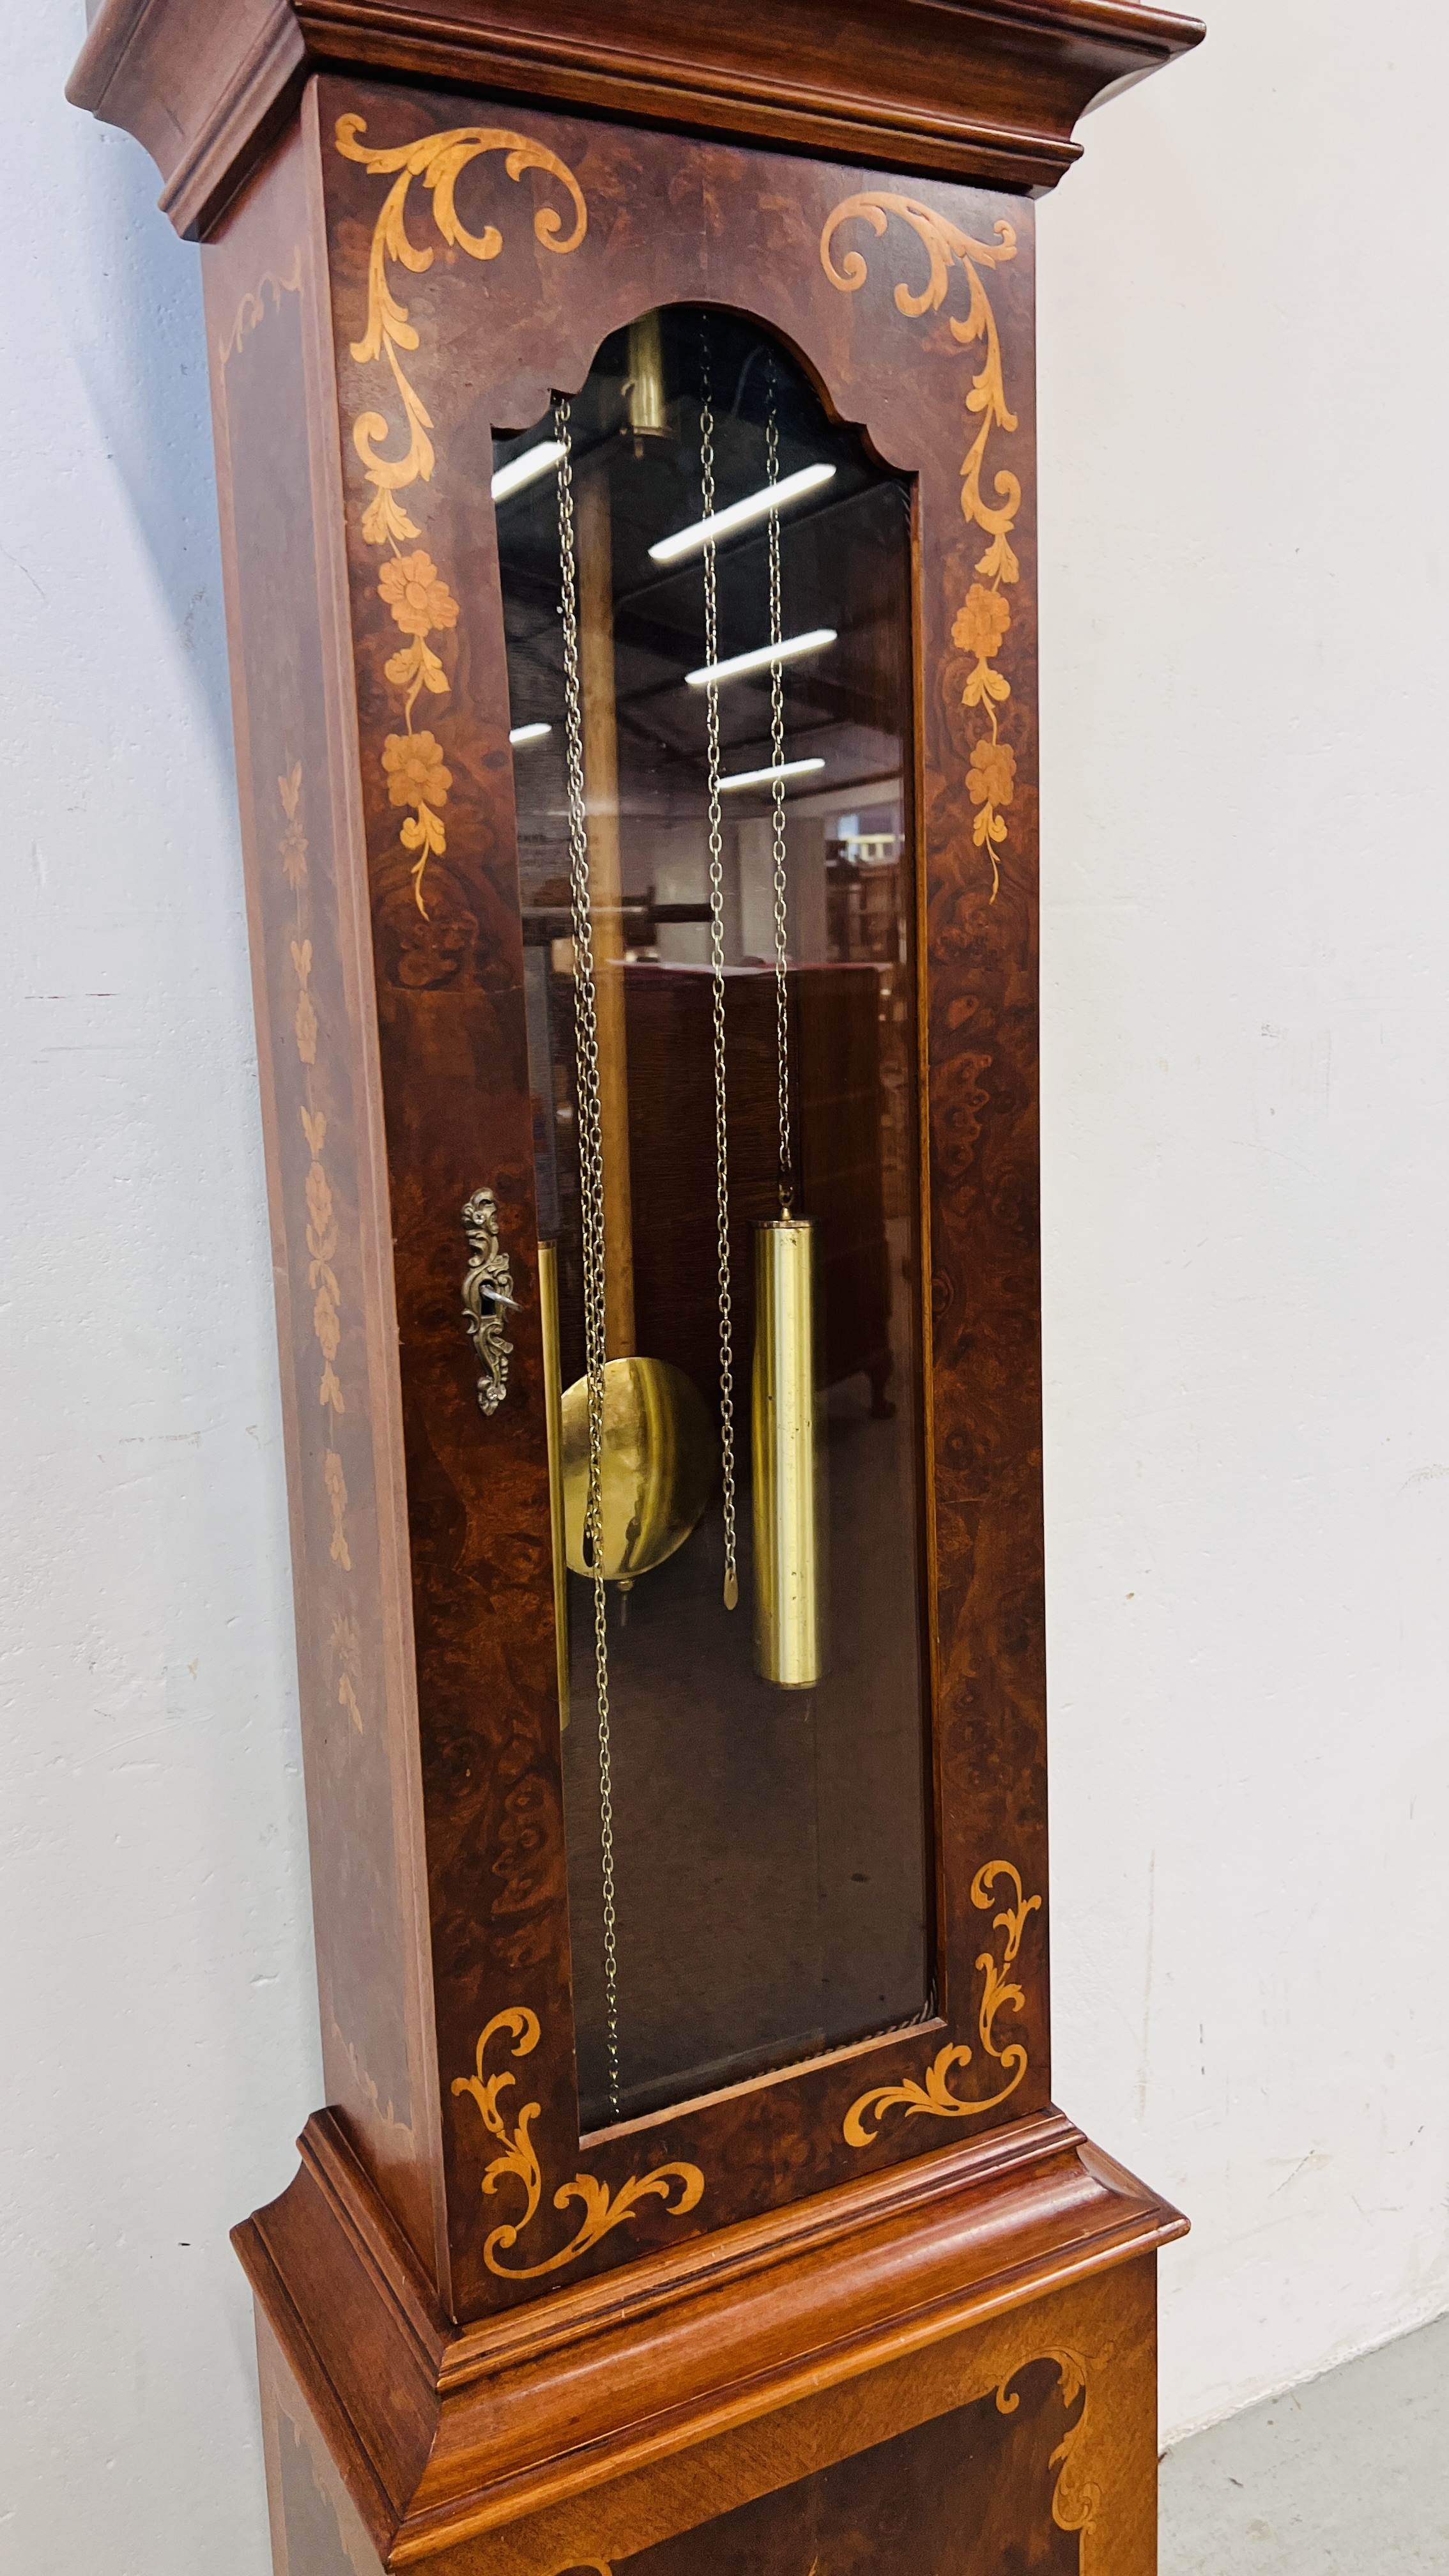 A REPRODUCTION DUTCH STYLE LONG CASE CLOCK WITH MARQUETRY INLAID STYLE DETAILING FACE MARKED TEMPUS - Image 6 of 13